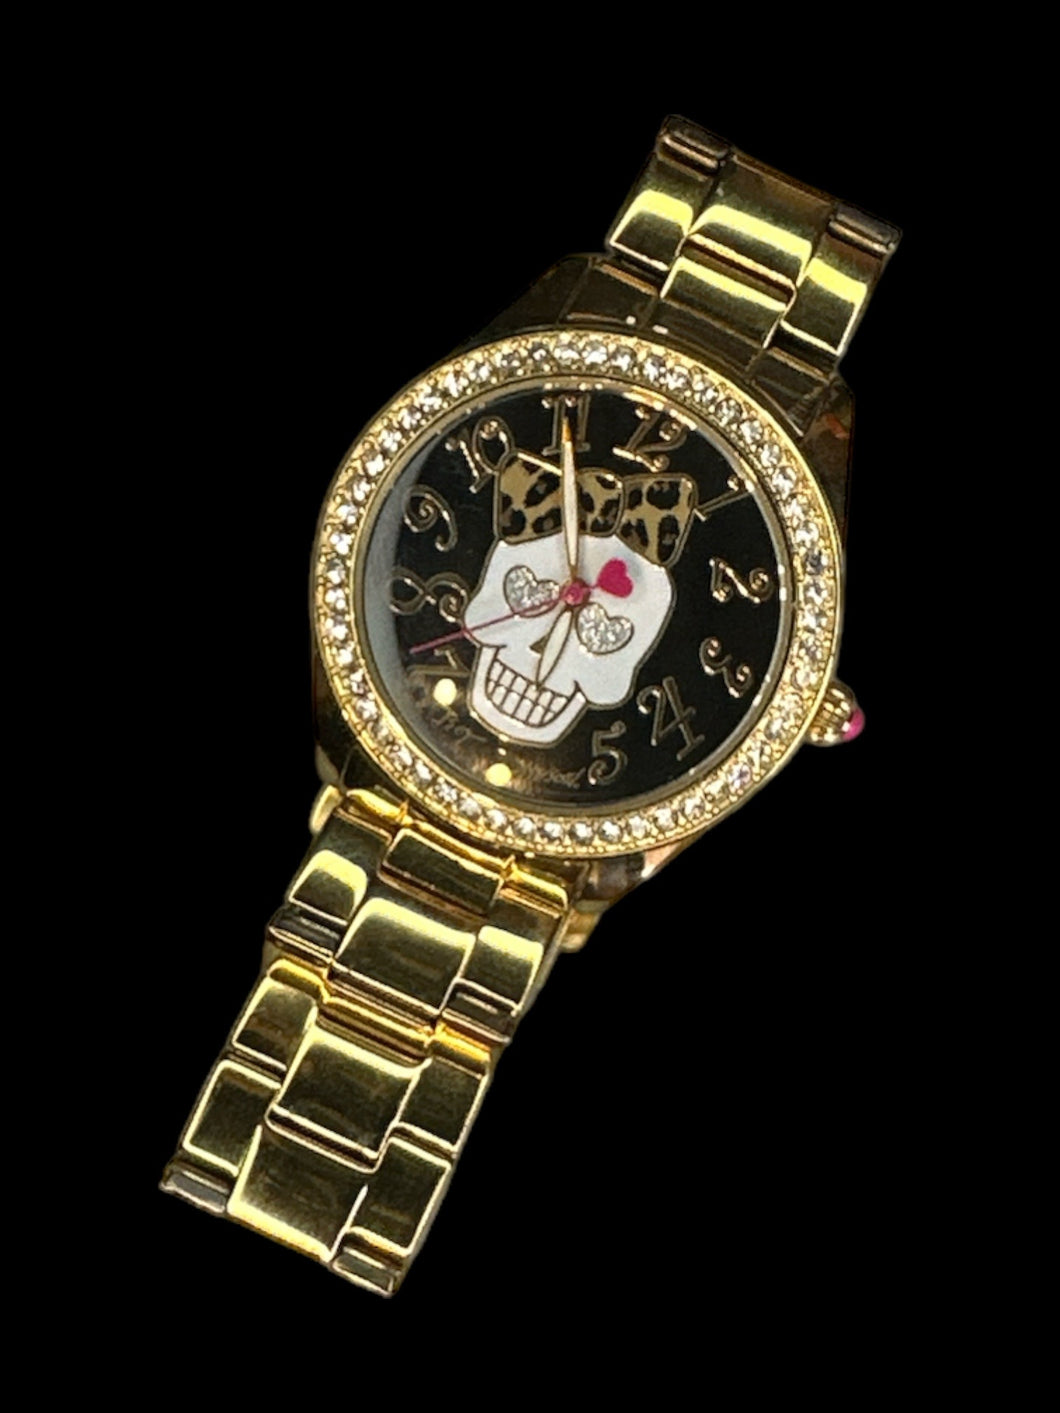 Gold-like Betsey Johnson watch w/ oyster style band, jeweled case, decorative hands, bow wearing skull face graphic, pink detail on dial, & folding clasp closure